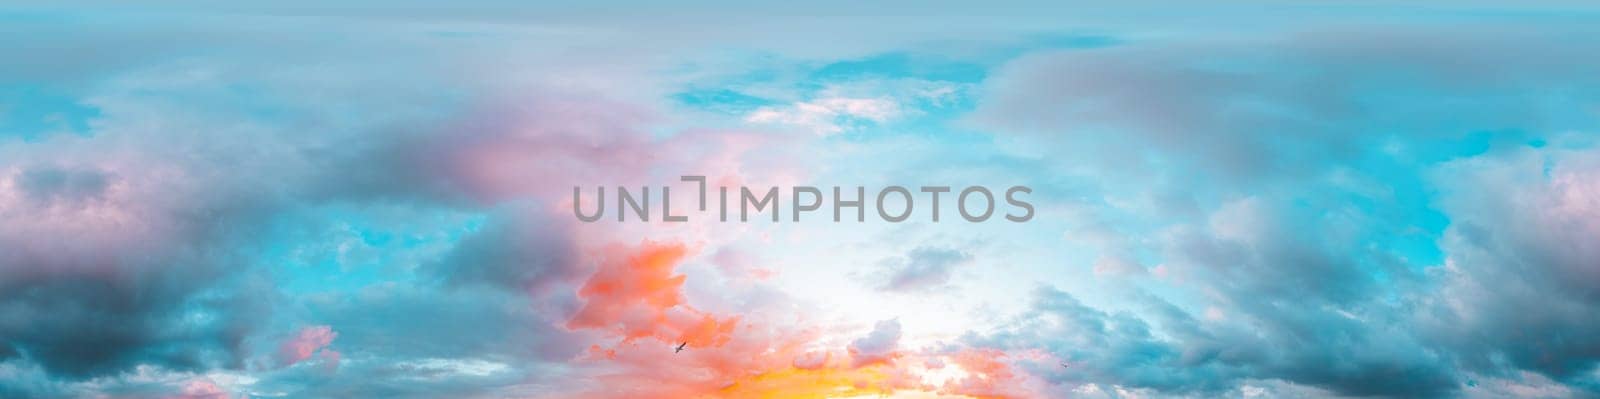 Sunset sky panorama with bright glowing pink Cumulus clouds. HDR 360 seamless spherical panorama. Full zenith or sky dome for 3D visualization, sky replacement for aerial drone panoramas. by Matiunina